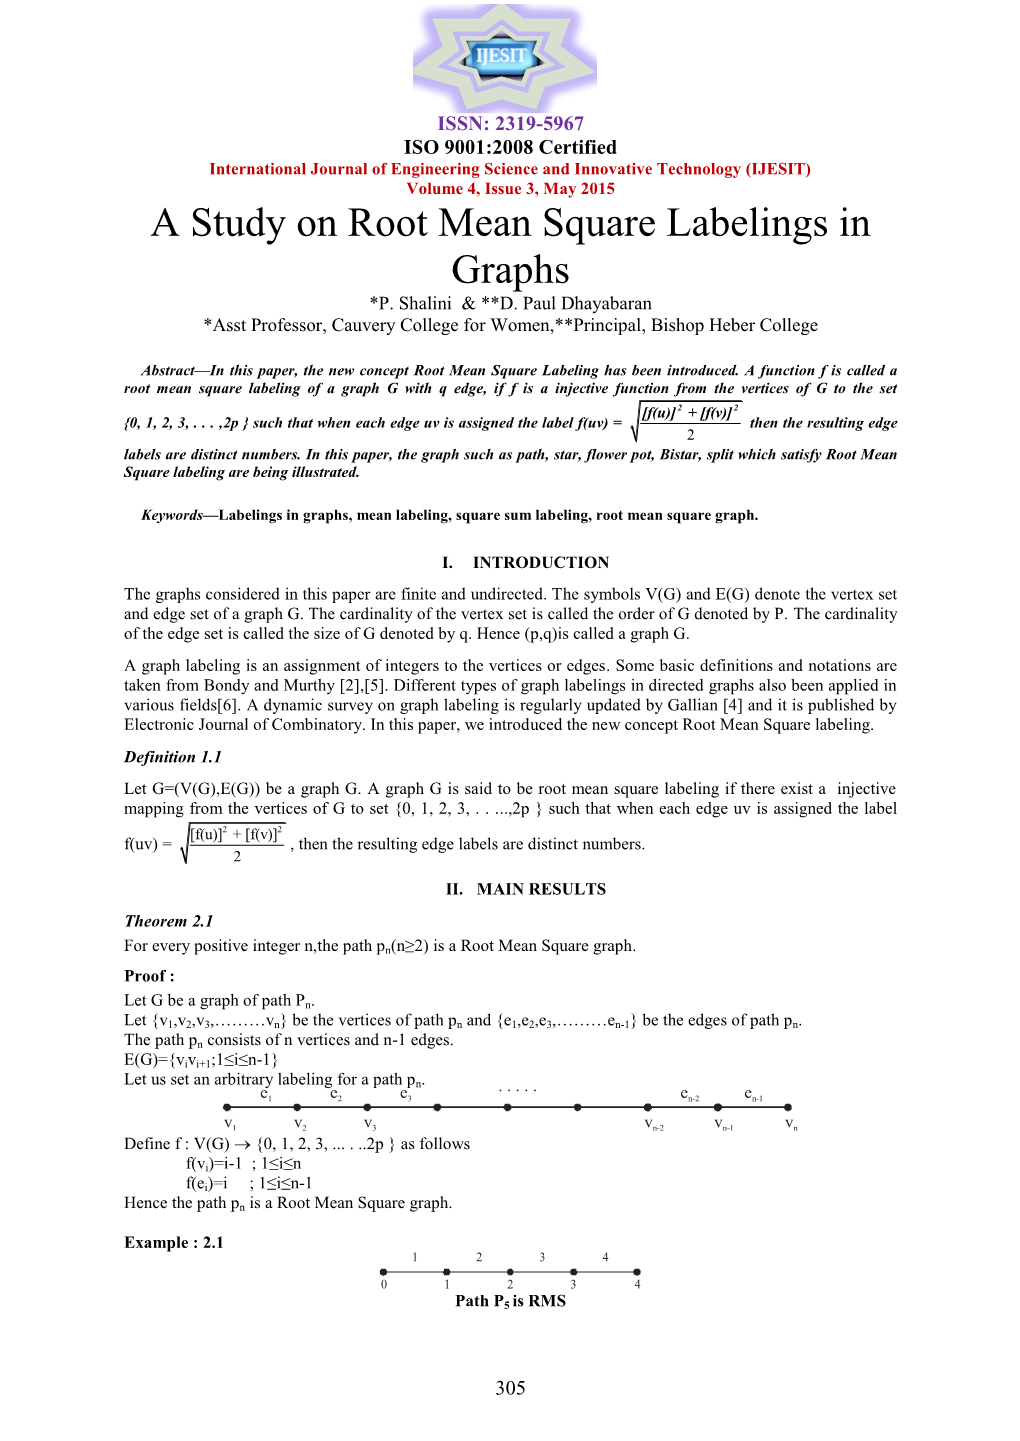 A Study on Root Mean Square Labelings in Graphs *P